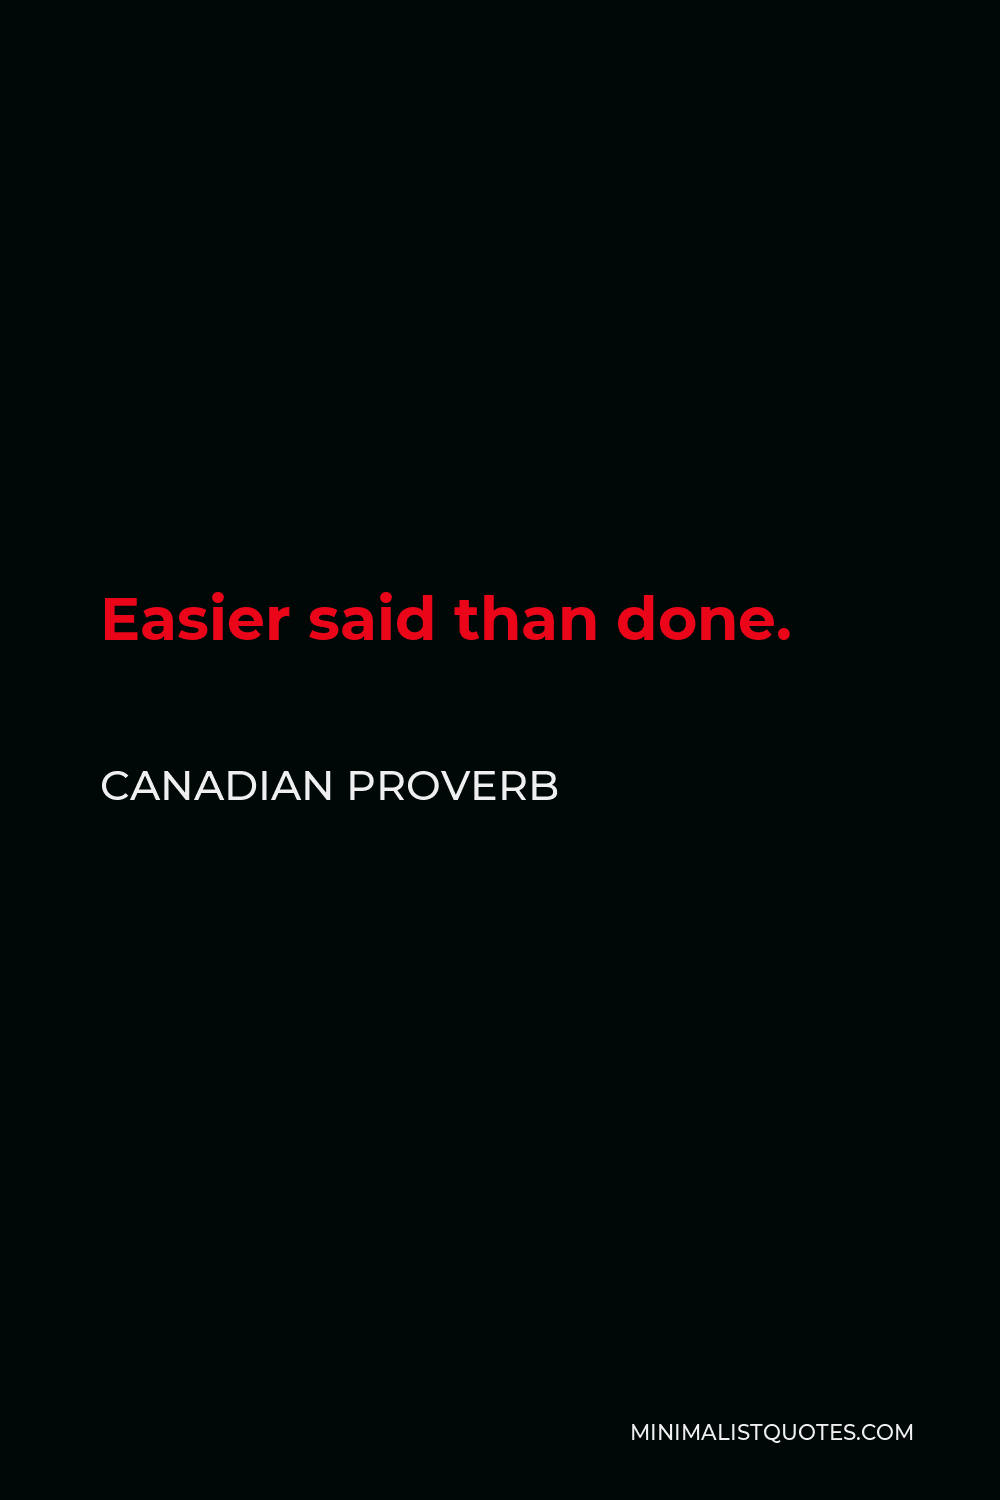 Canadian Proverb Quote - Easier said than done.